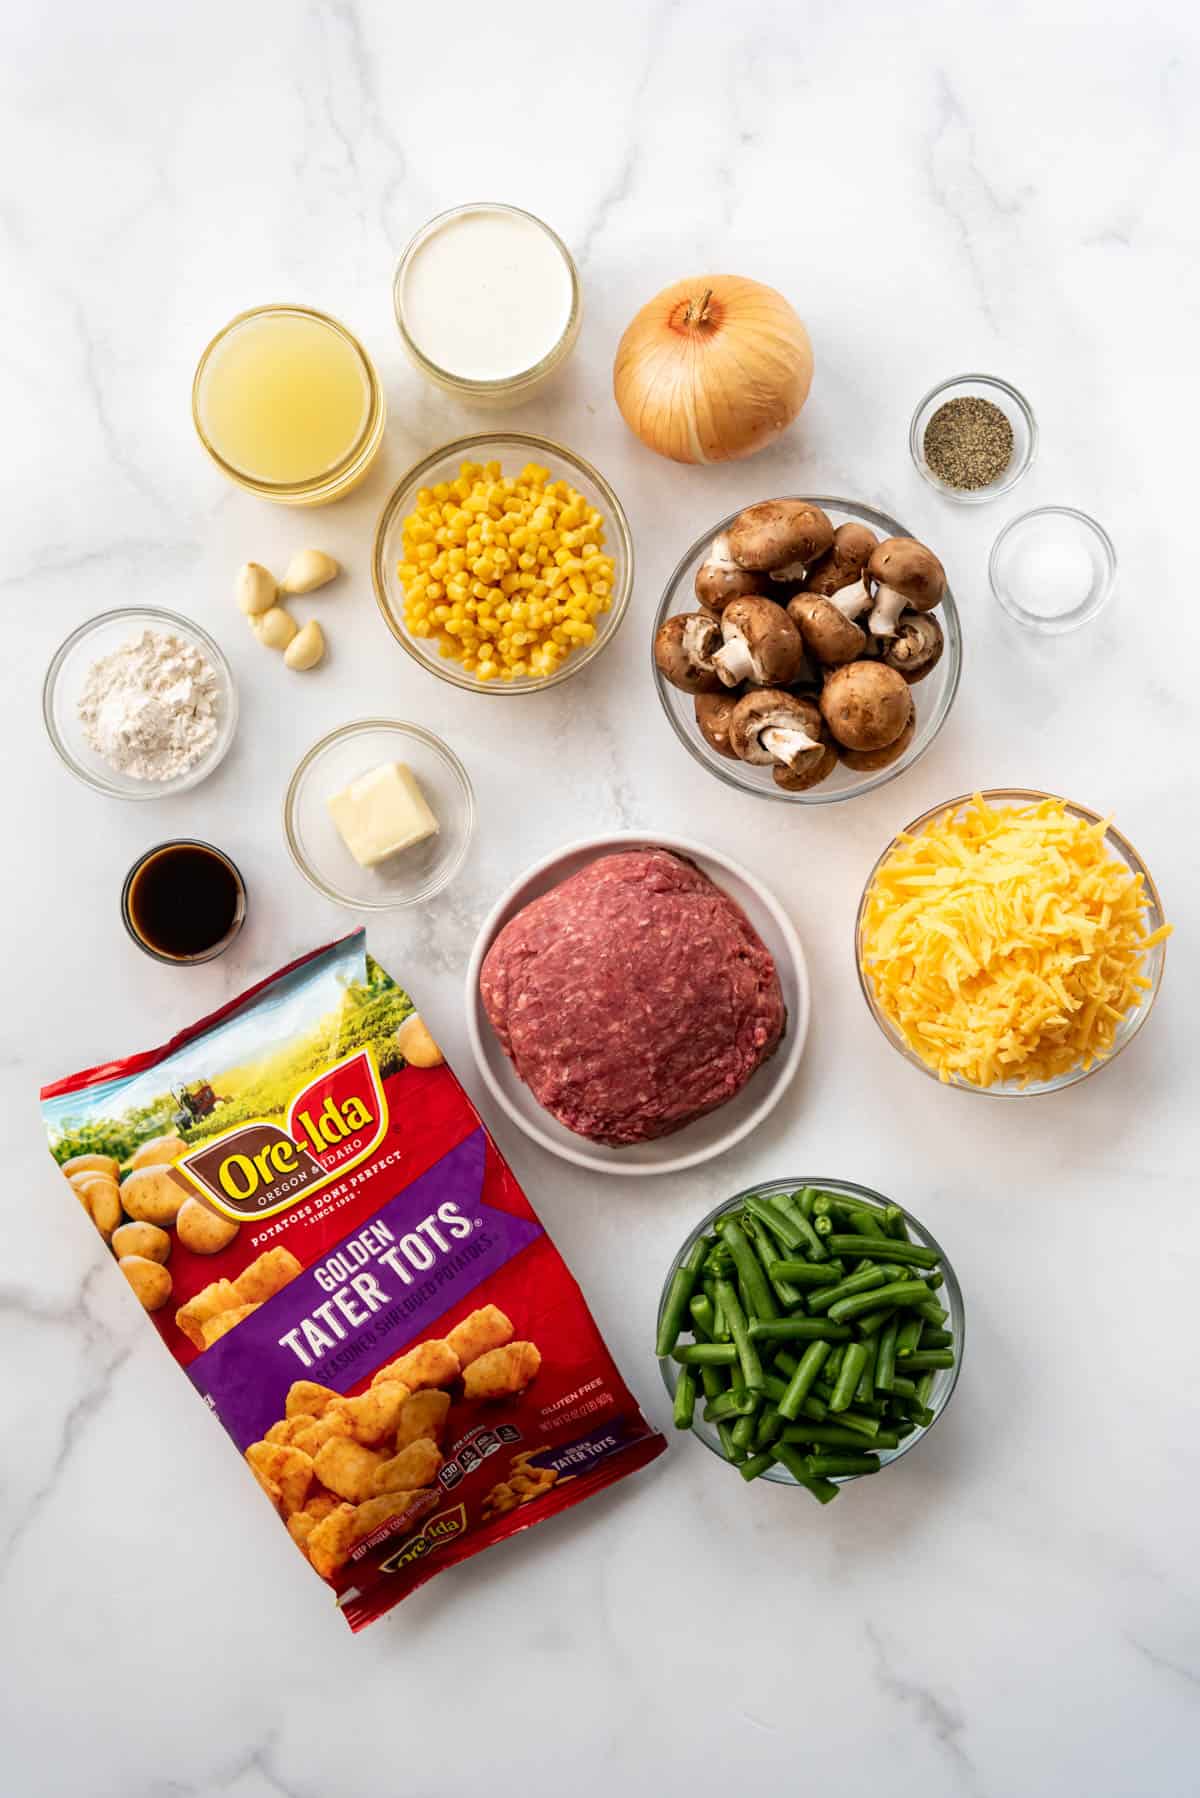 Ingredients for making tater tot casserole.